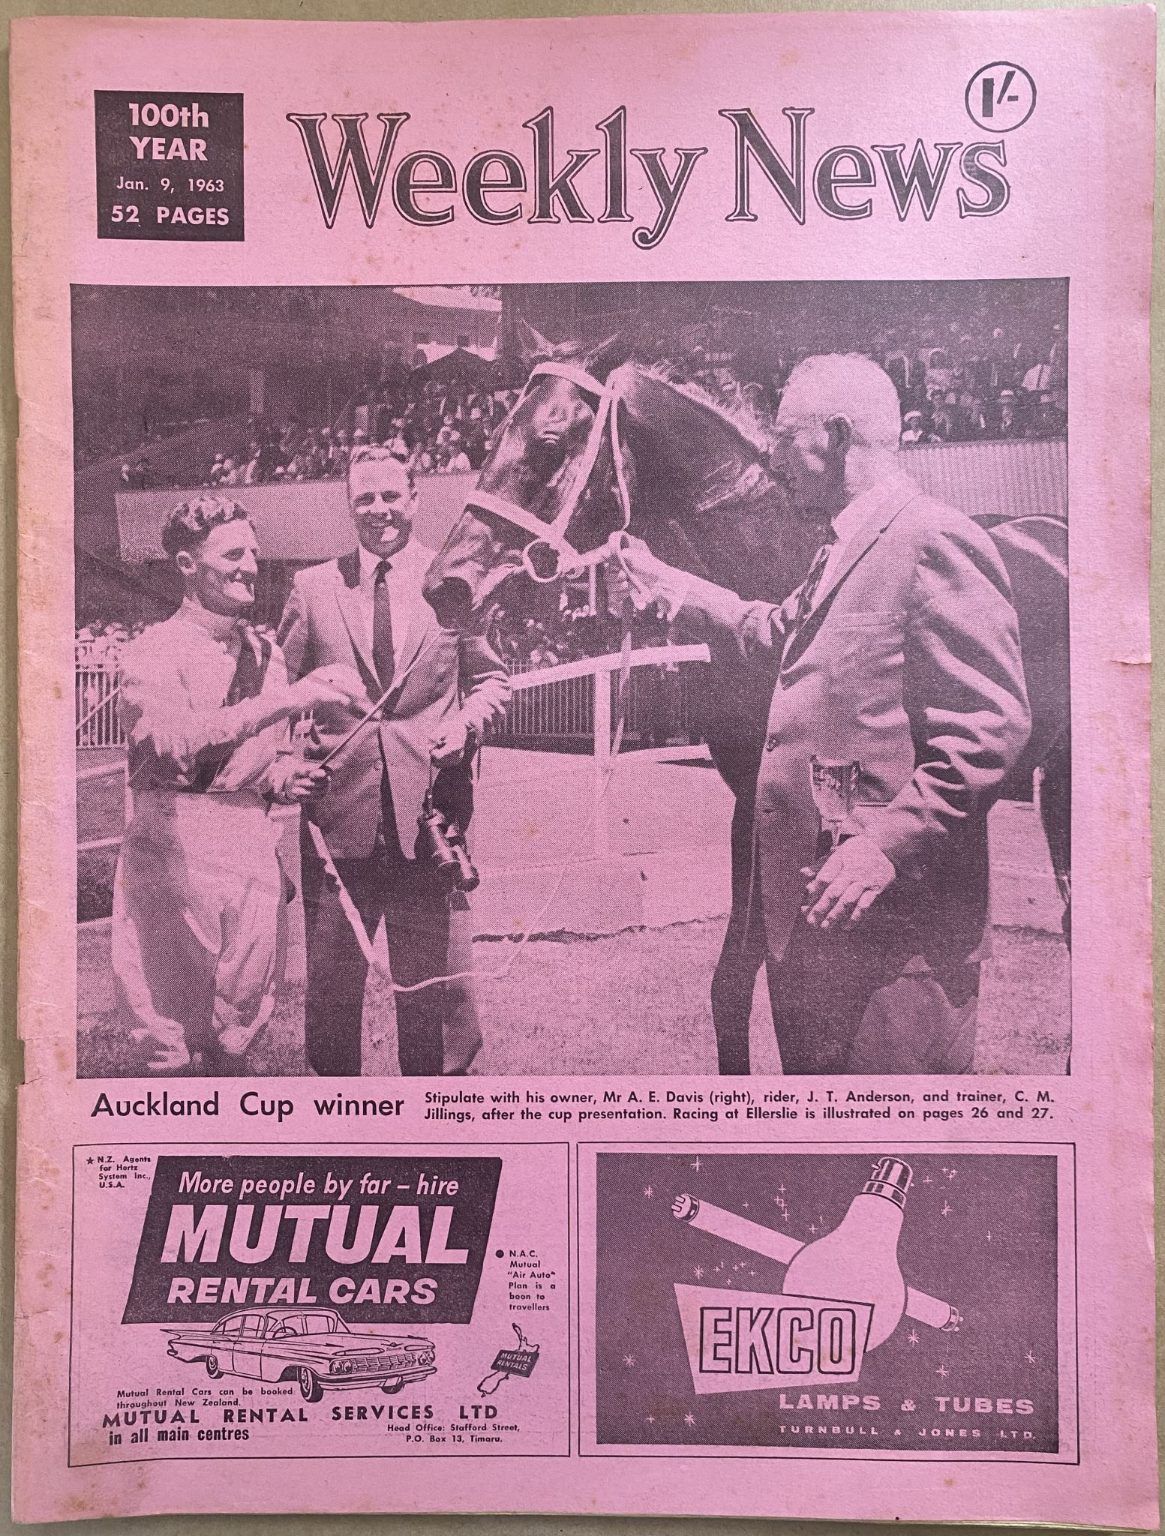 OLD NEWSPAPER: The Weekly News, No. 5172, 9 January 1963